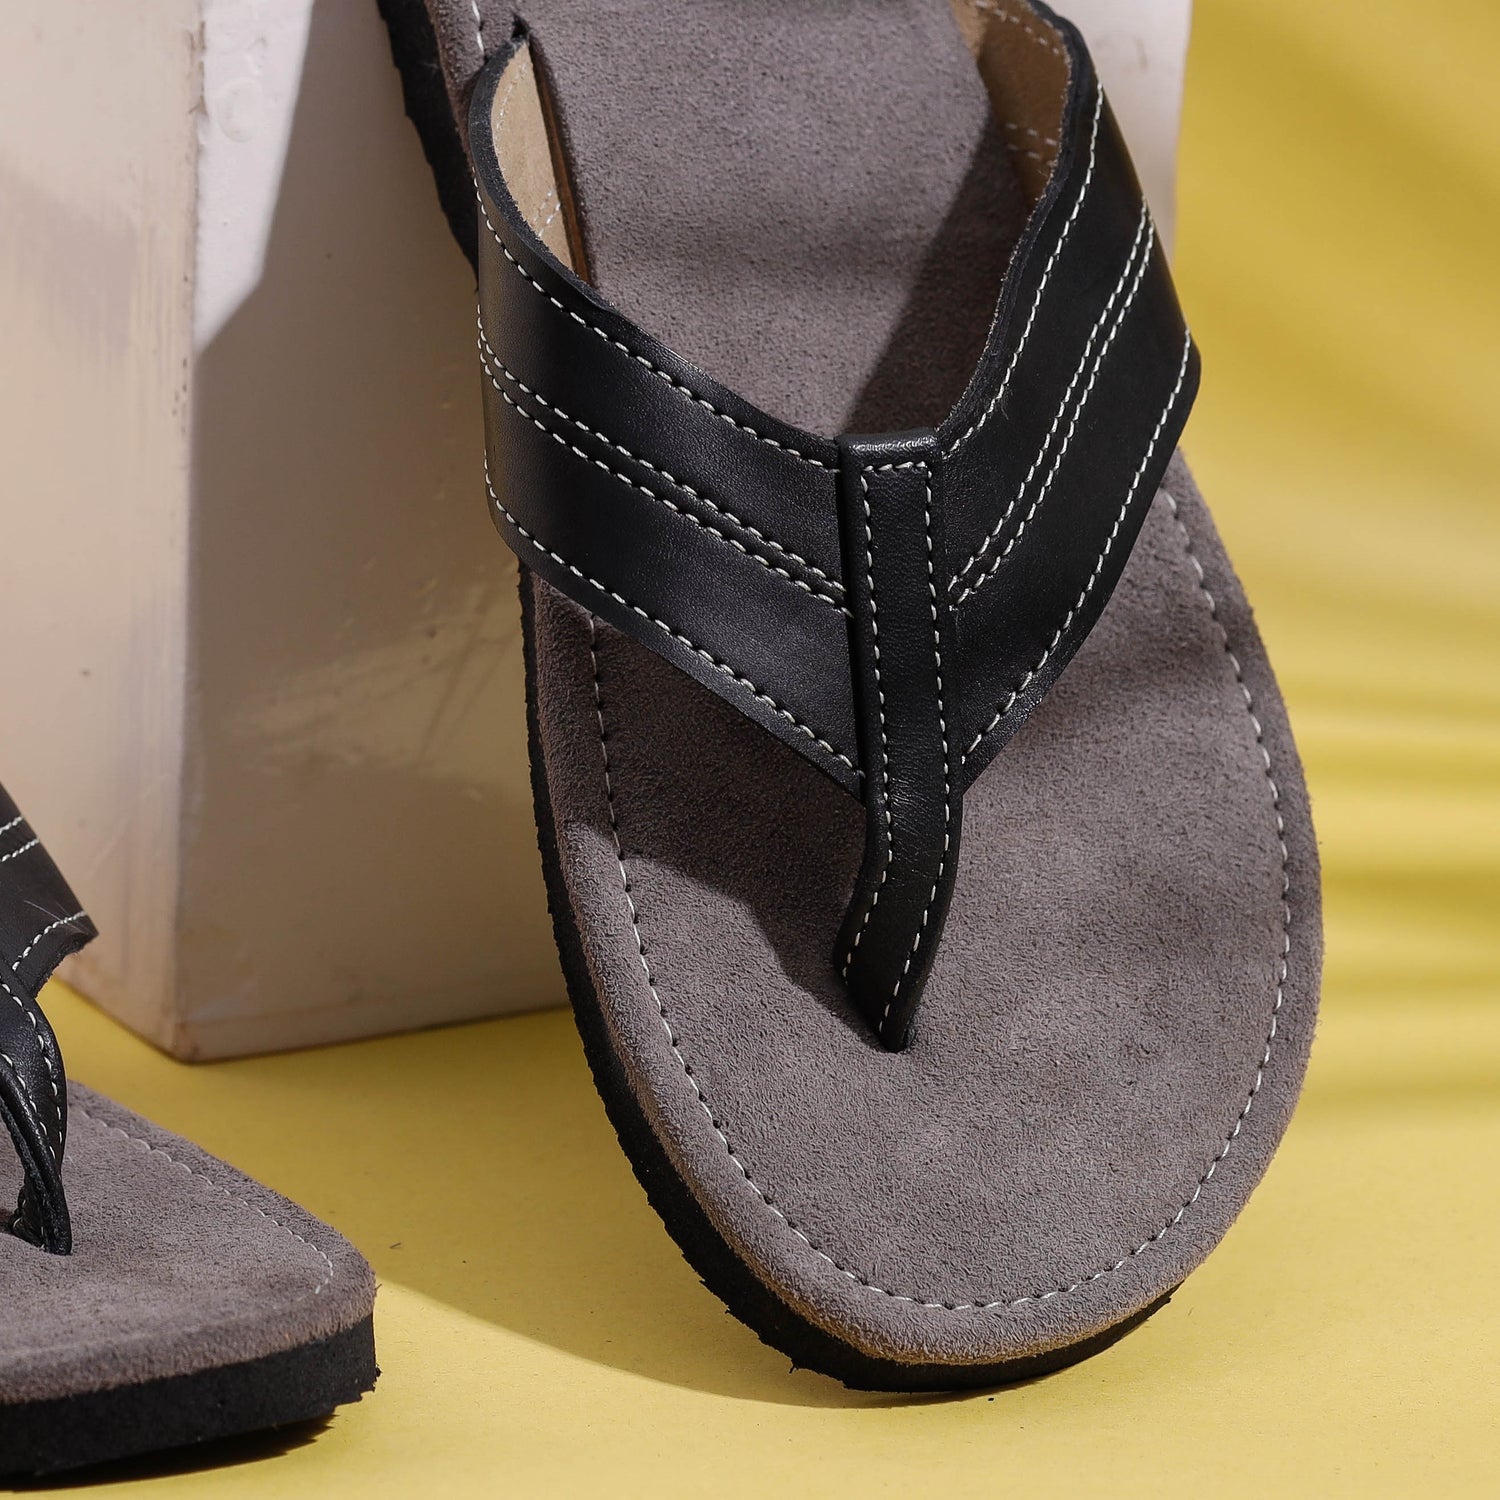 Grey & Black Handcrafted Men's Leather Slippers with Suede